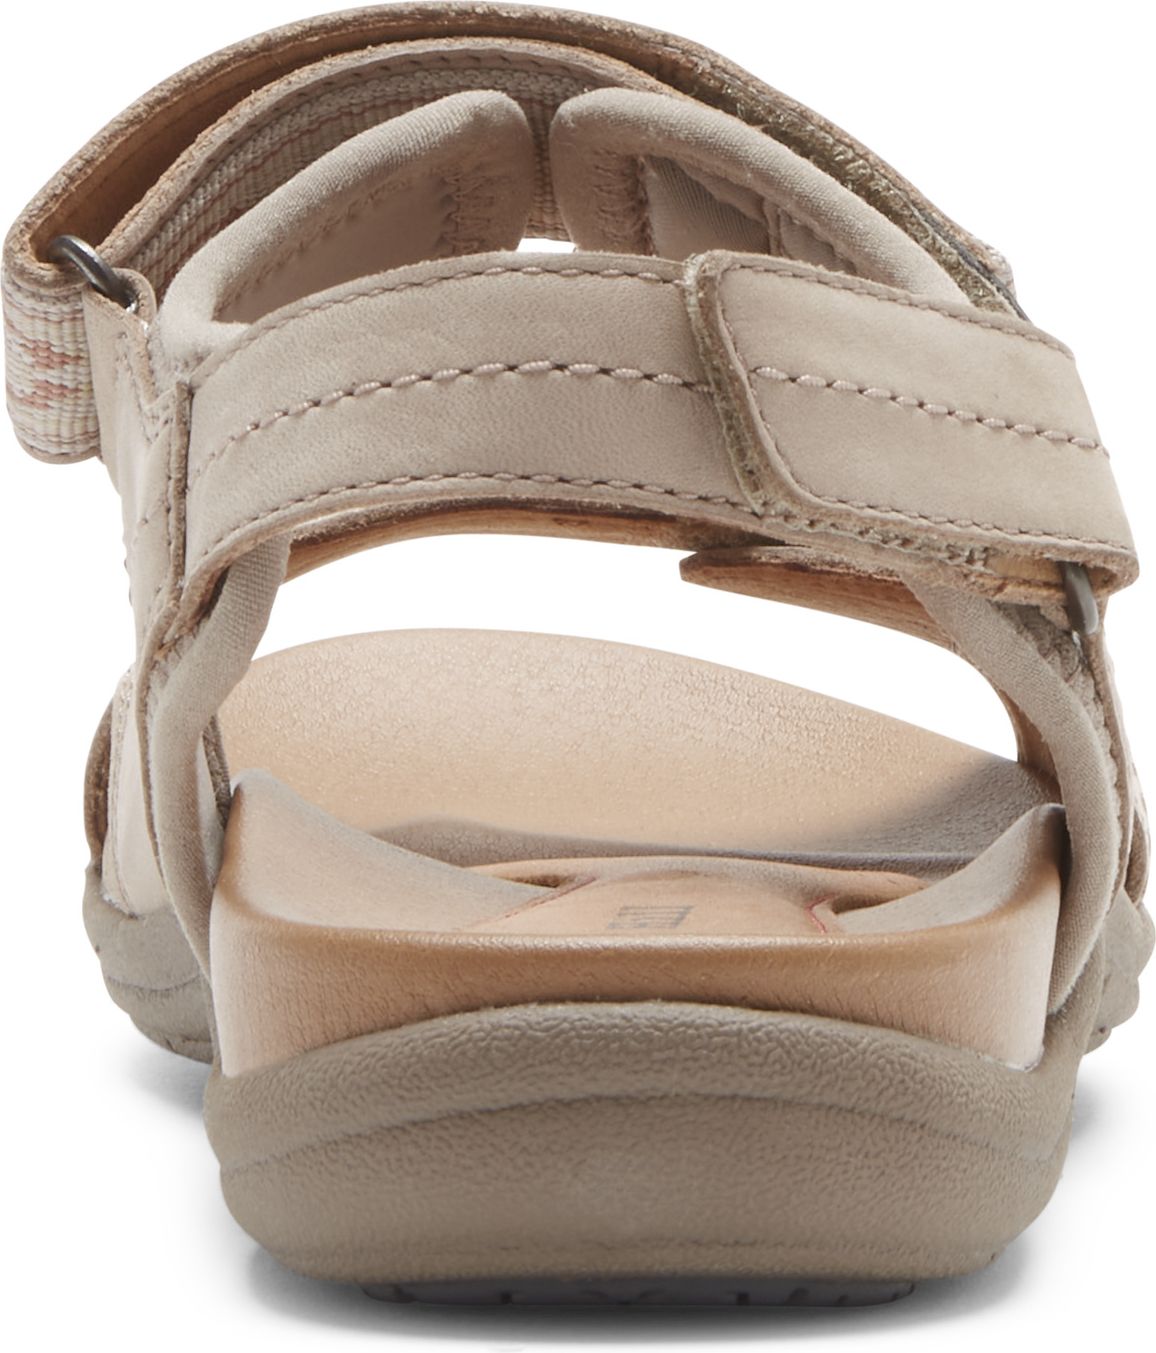 Cobb Hill Sandals Rubey Adjustable Strap Nude